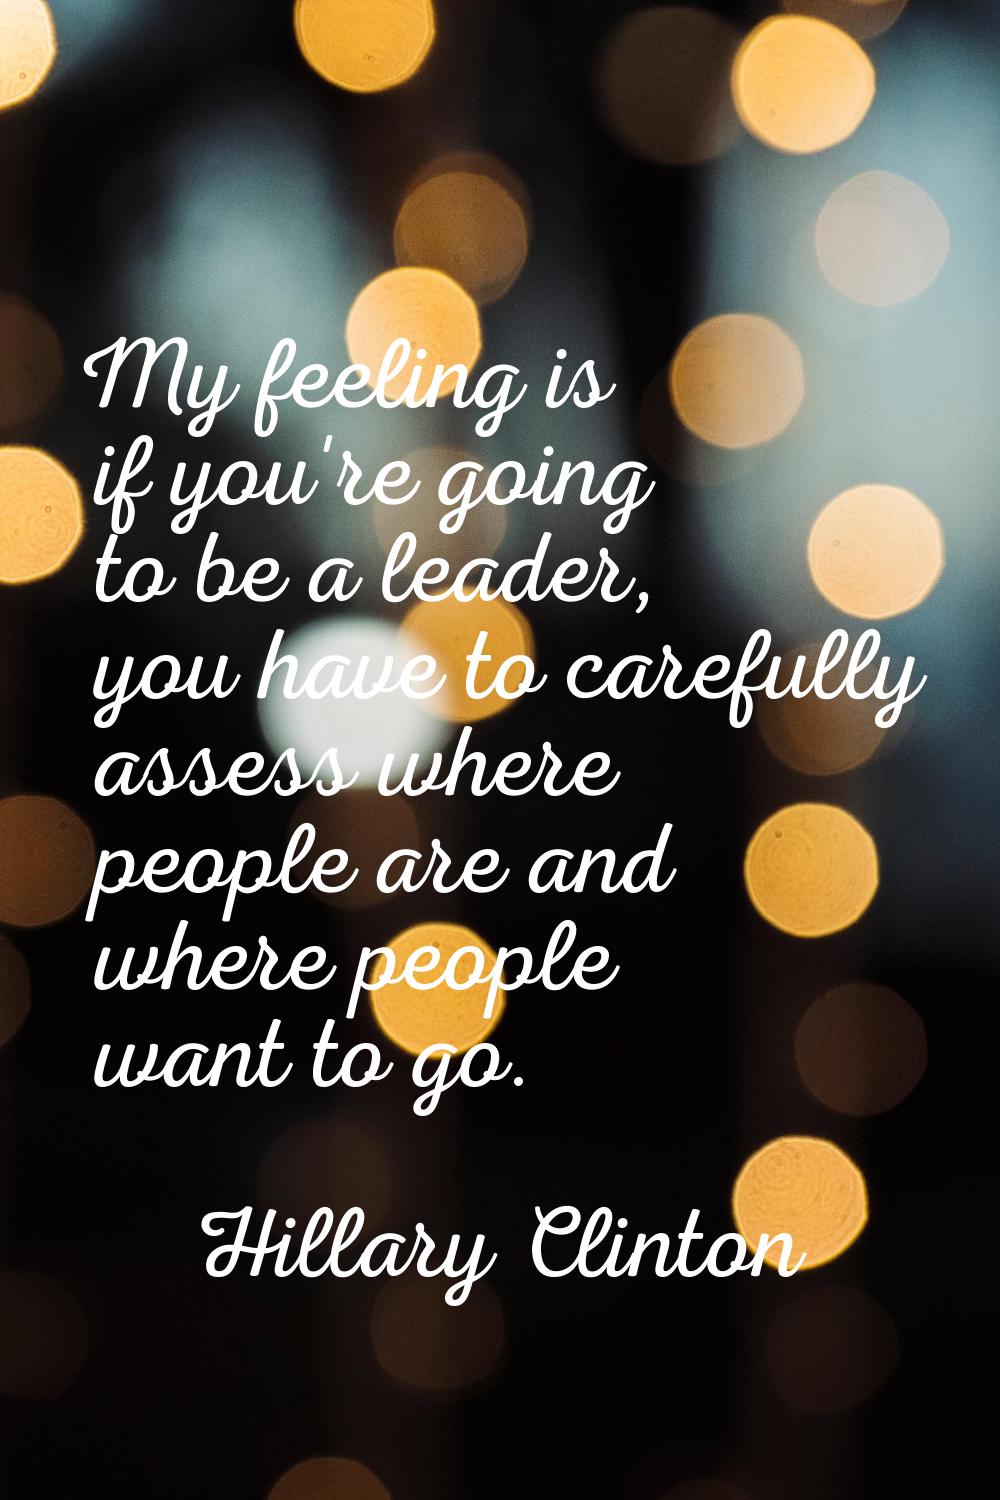 My feeling is if you're going to be a leader, you have to carefully assess where people are and whe